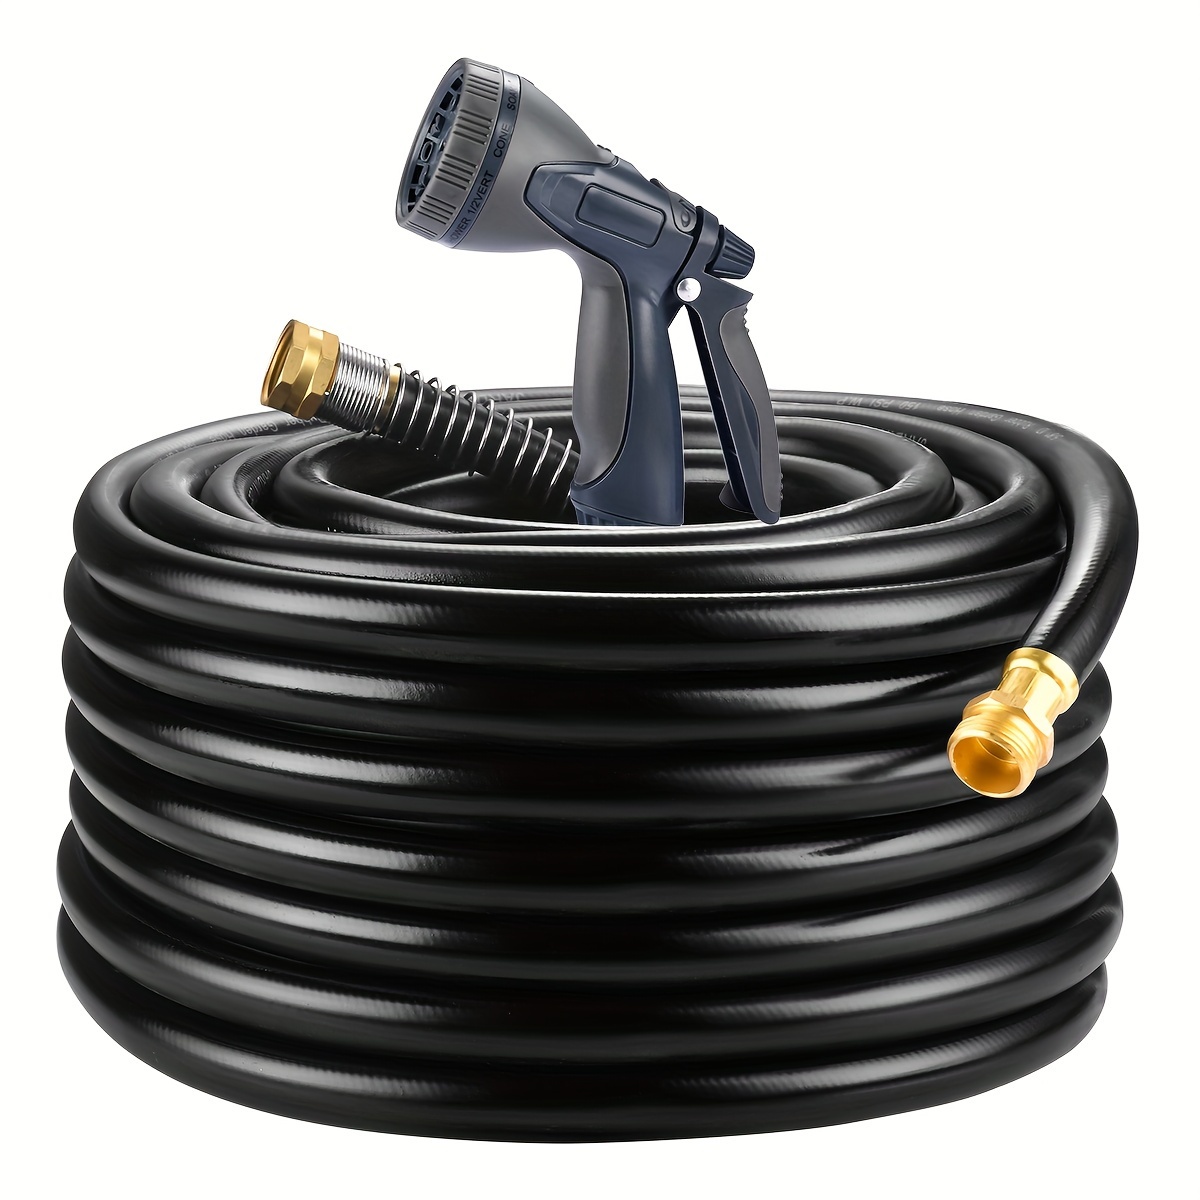 

Heavy Duty Garden Hose 5/8 Inch X 100ft, Premium Rubber Water Hose, Kink Resistant, Brass Fitting, Commercial Grade Hose With 10 Function Sprayer, Burst Pressure 450 Psi